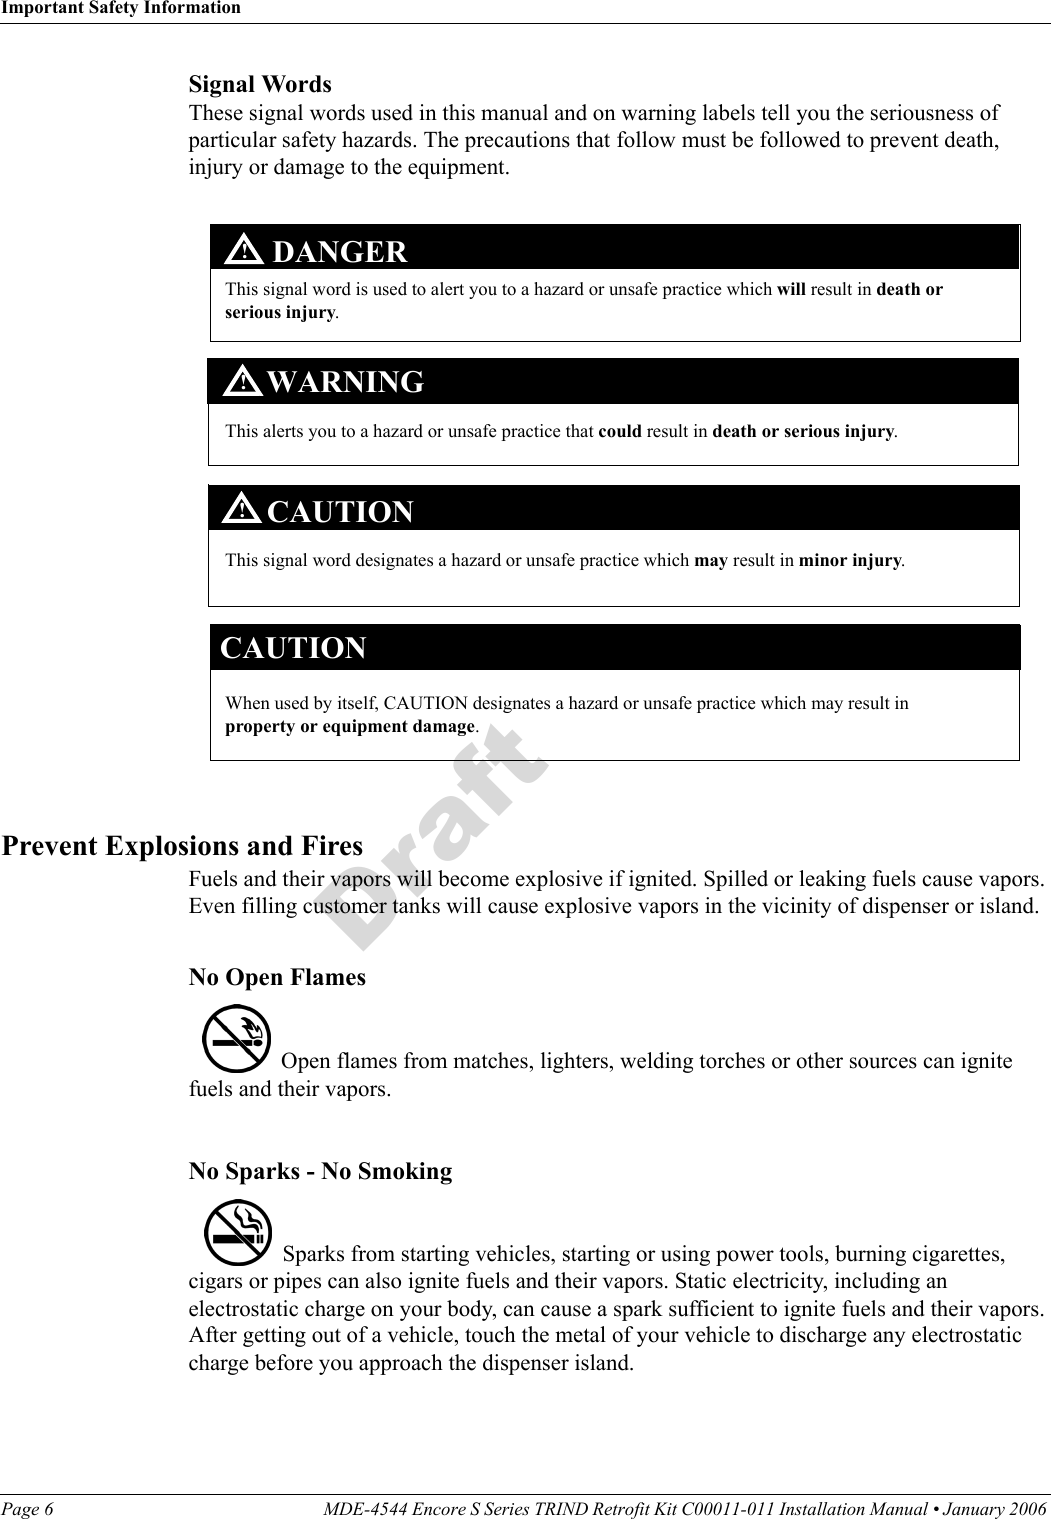 Important Safety InformationPage 6 MDE-4544 Encore S Series TRIND Retrofit Kit C00011-011 Installation Manual • January 2006 DraftSignal WordsThese signal words used in this manual and on warning labels tell you the seriousness of particular safety hazards. The precautions that follow must be followed to prevent death, injury or damage to the equipment.  This signal word designates a hazard or unsafe practice which may result in minor injury.This signal word is used to alert you to a hazard or unsafe practice which will result in death or serious injury.This alerts you to a hazard or unsafe practice that could result in death or serious injury.CAUTIONWhen used by itself, CAUTION designates a hazard or unsafe practice which may result in property or equipment damage.CAUTIONDANGERWARNING!!!Prevent Explosions and FiresFuels and their vapors will become explosive if ignited. Spilled or leaking fuels cause vapors. Even filling customer tanks will cause explosive vapors in the vicinity of dispenser or island.No Open Flames  Open flames from matches, lighters, welding torches or other sources can ignite fuels and their vapors.No Sparks - No Smoking  Sparks from starting vehicles, starting or using power tools, burning cigarettes, cigars or pipes can also ignite fuels and their vapors. Static electricity, including an electrostatic charge on your body, can cause a spark sufficient to ignite fuels and their vapors. After getting out of a vehicle, touch the metal of your vehicle to discharge any electrostatic charge before you approach the dispenser island.